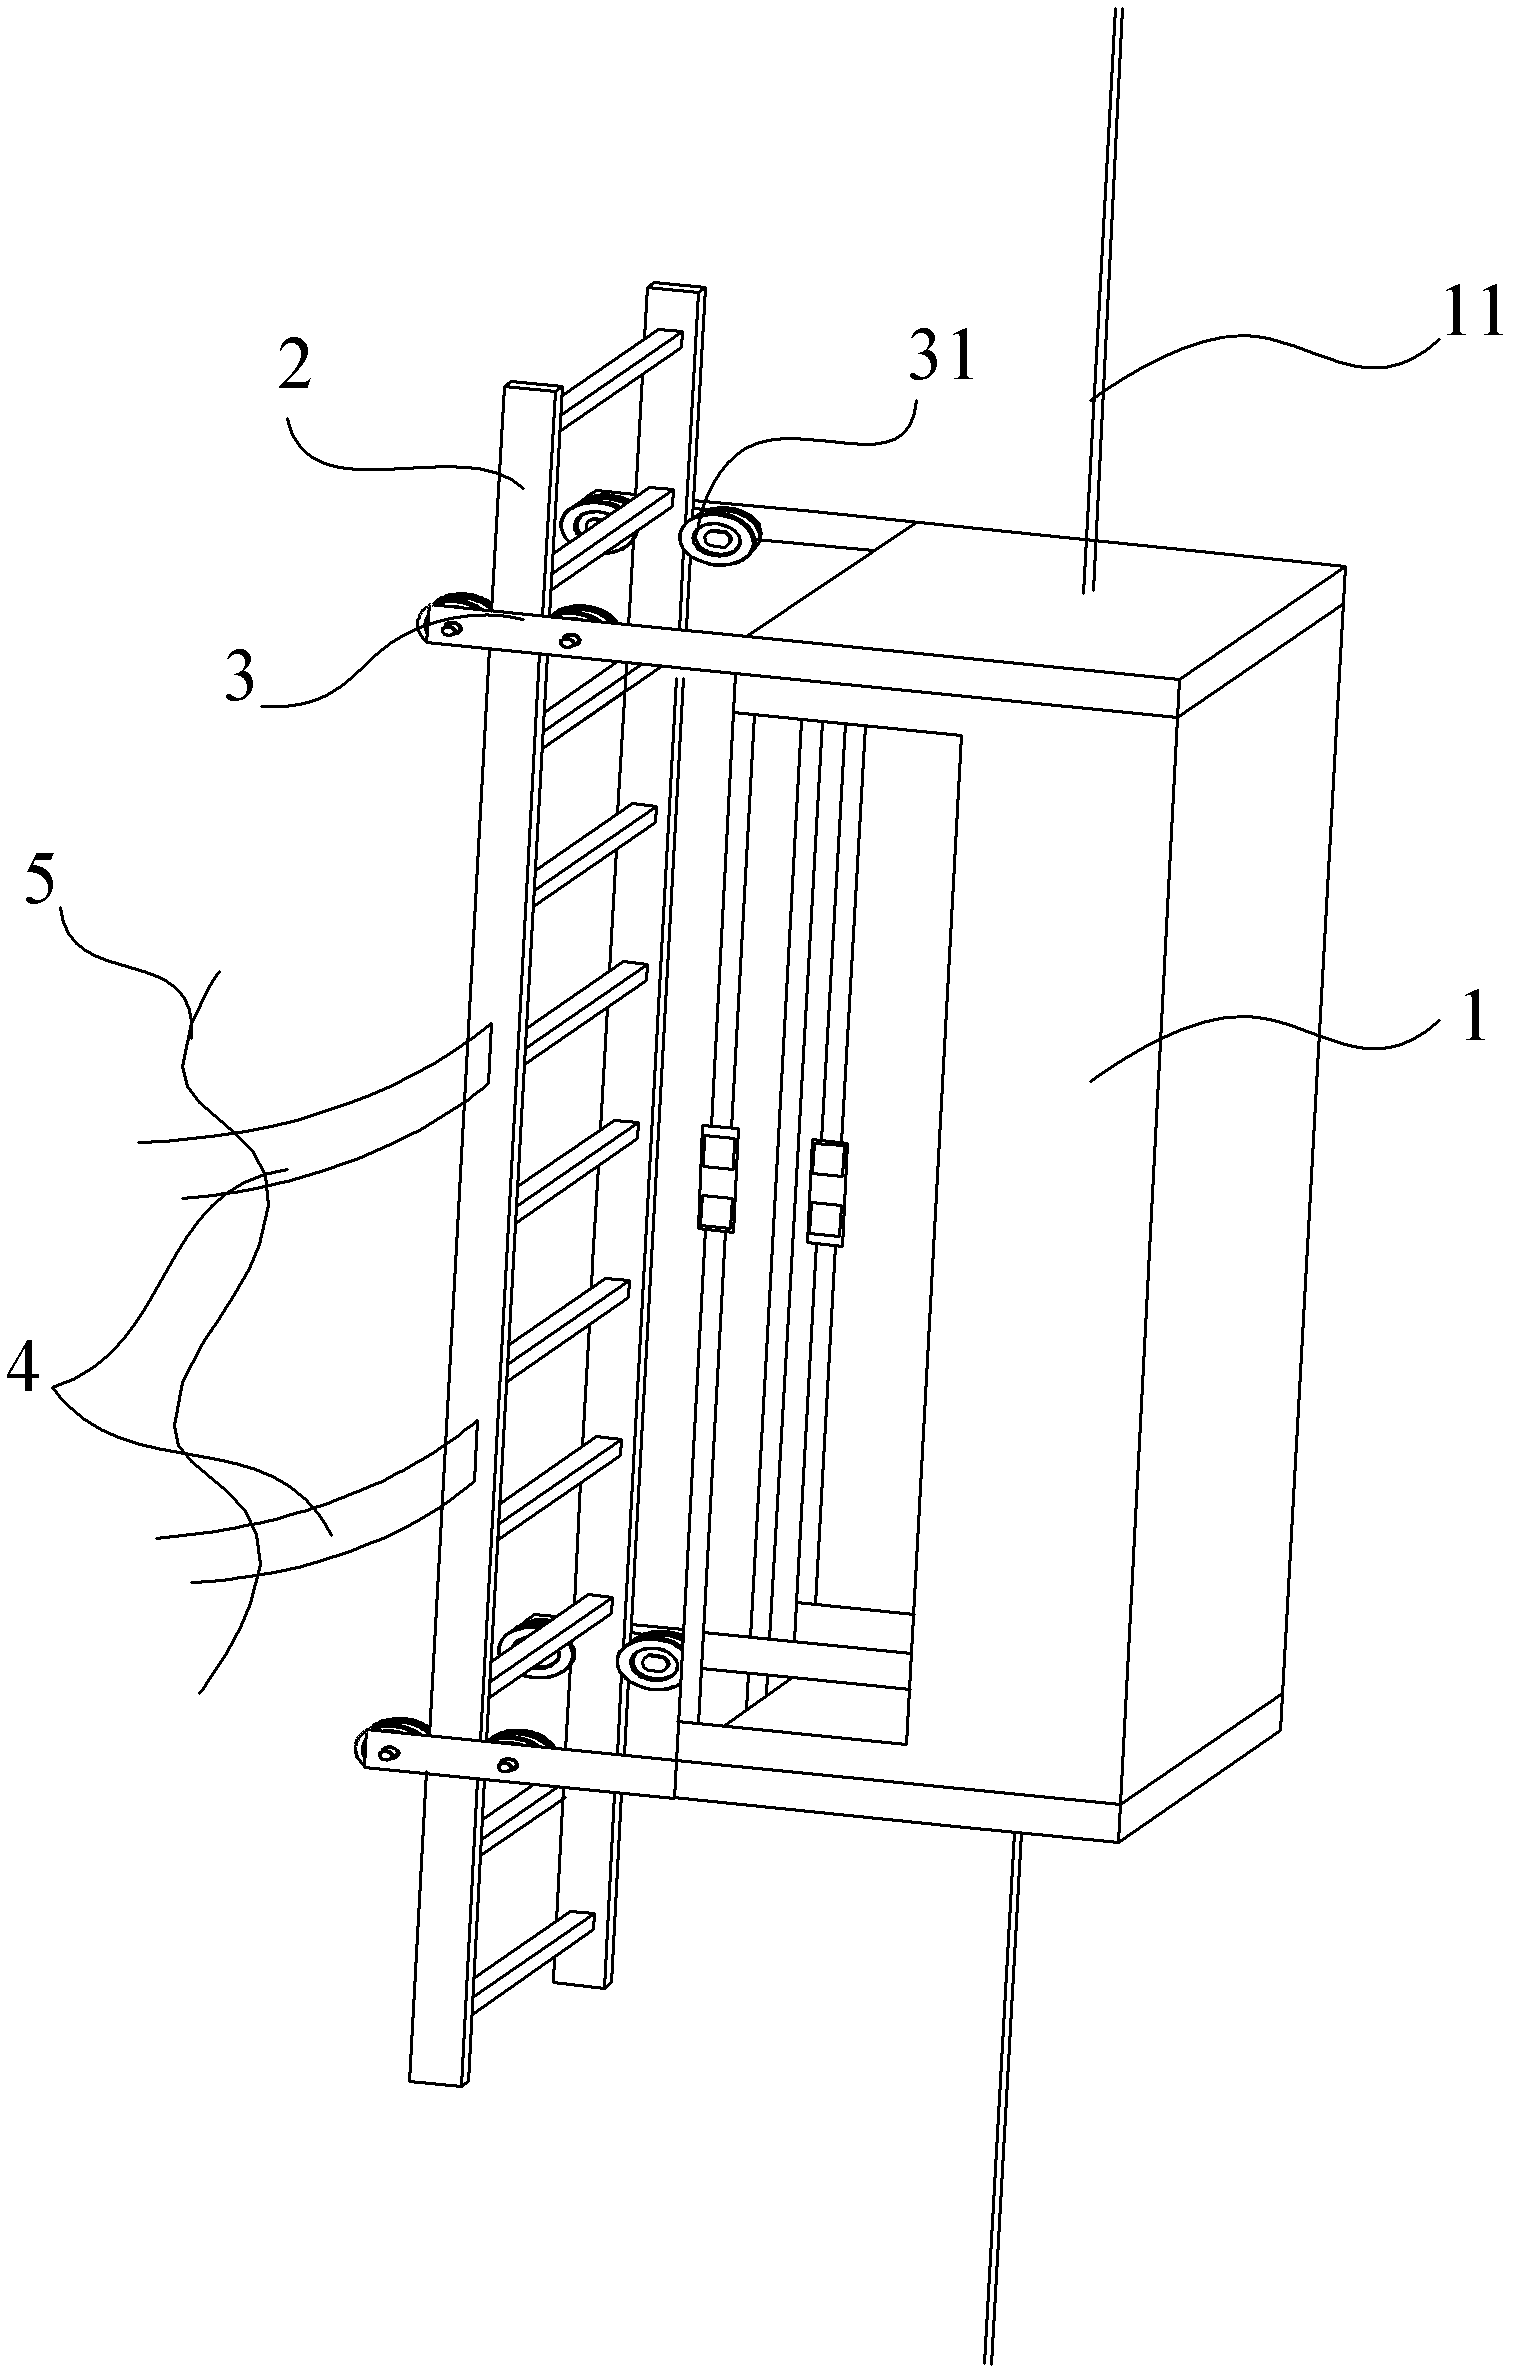 Miniature manned elevator for tower of wind turbine